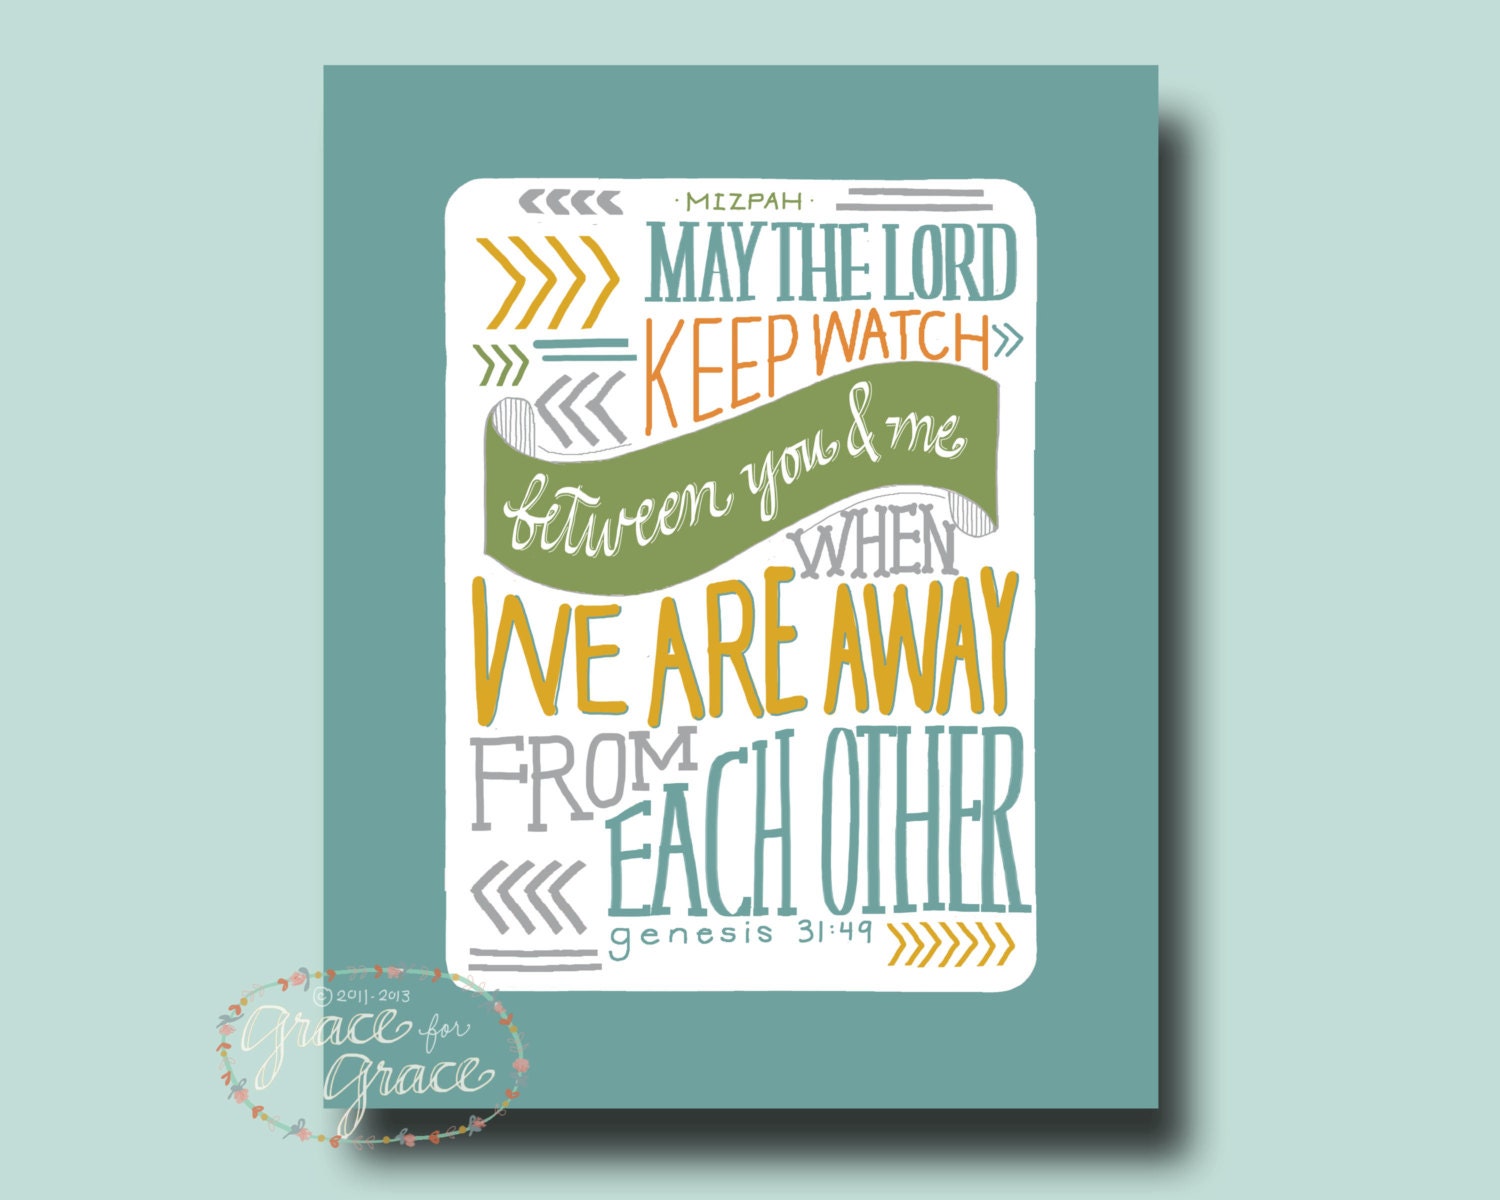 8x10 Fine Art Giclee Print- May the Lord Keep Watch Between You and Me - Hand Typography - Teal, Mustard, Olive, Grey - graceforgrace